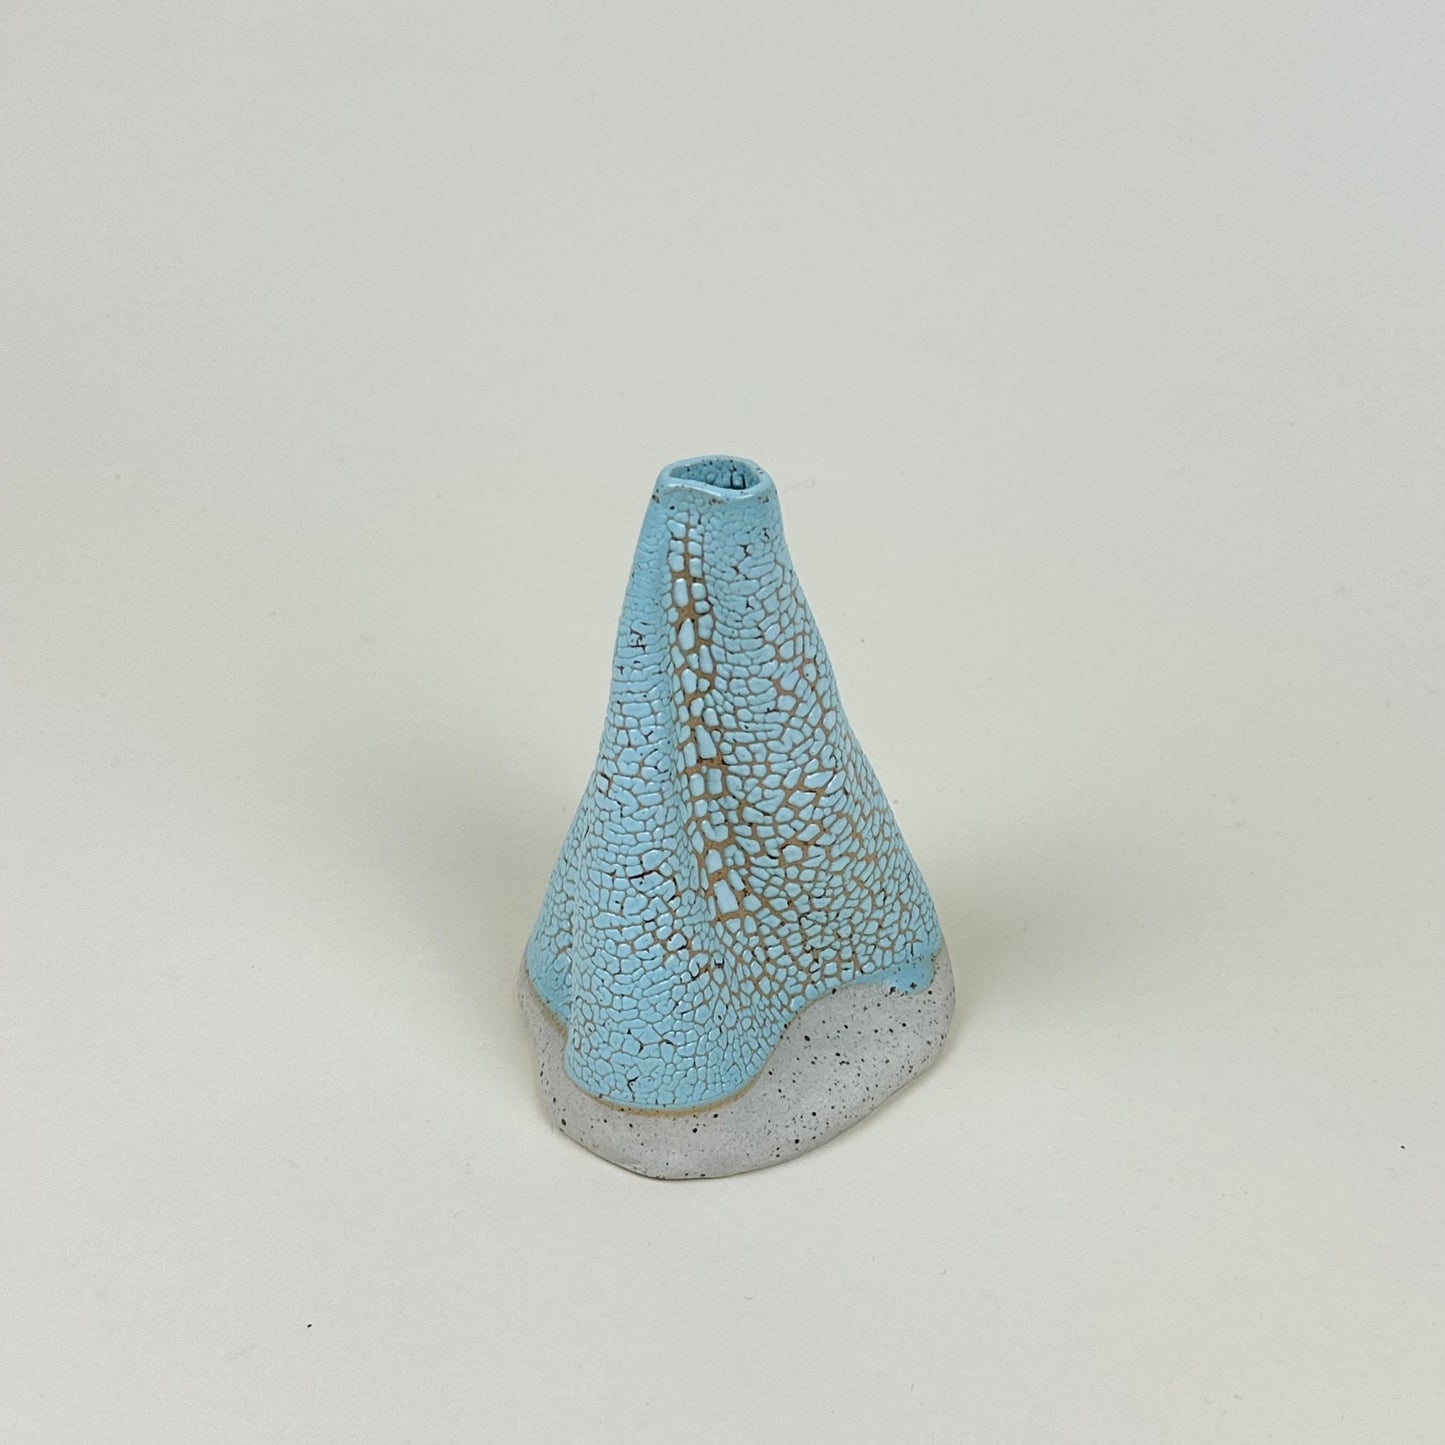 Navy and pink volcano vase (L) by Astrid Öhman